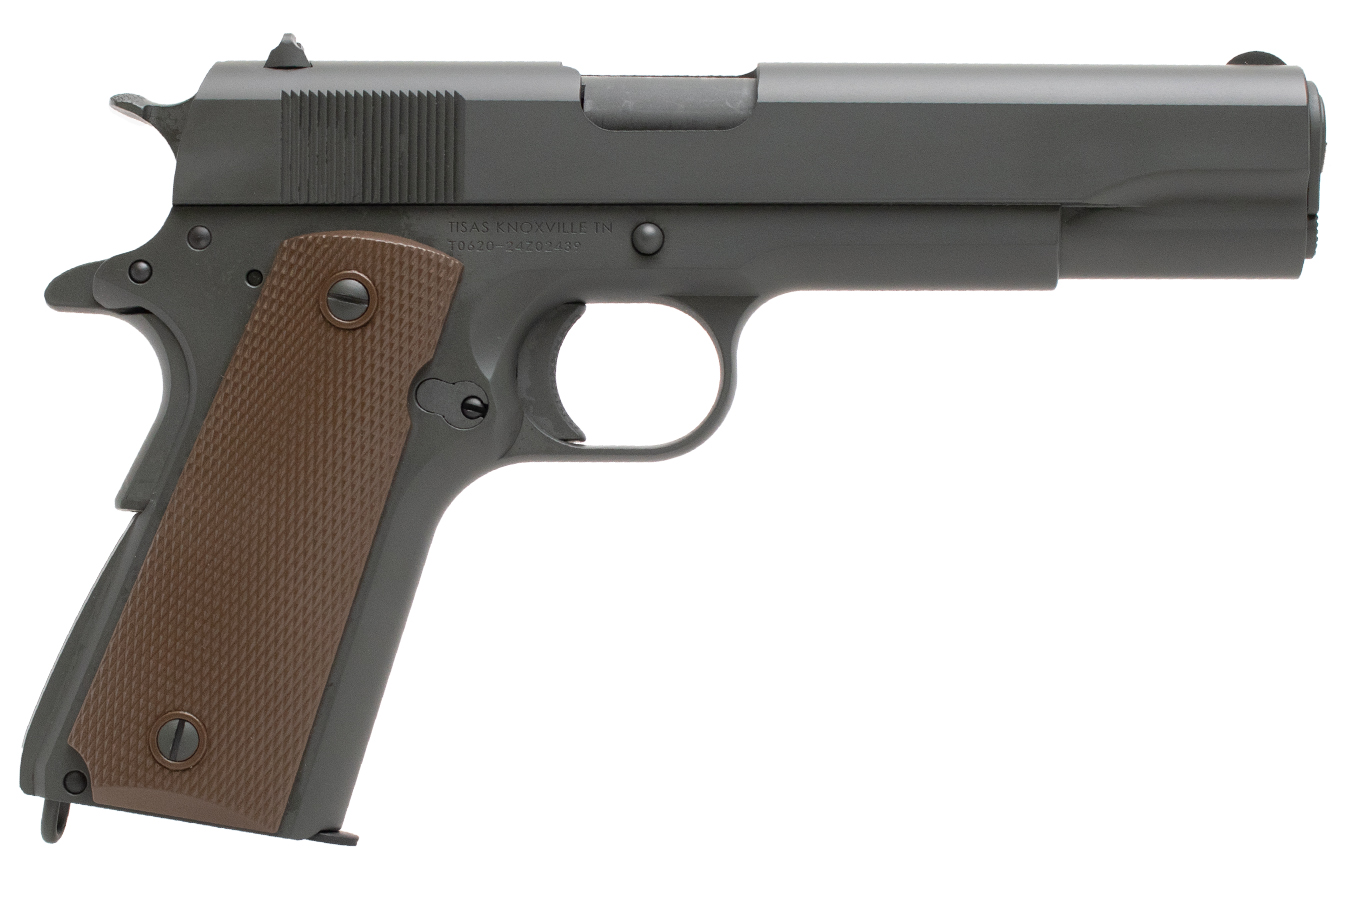 No. 4 Best Selling: TISAS 1911 A1 45 ACP 5 IN BBL GRAY CERAKOTE 1 MAG